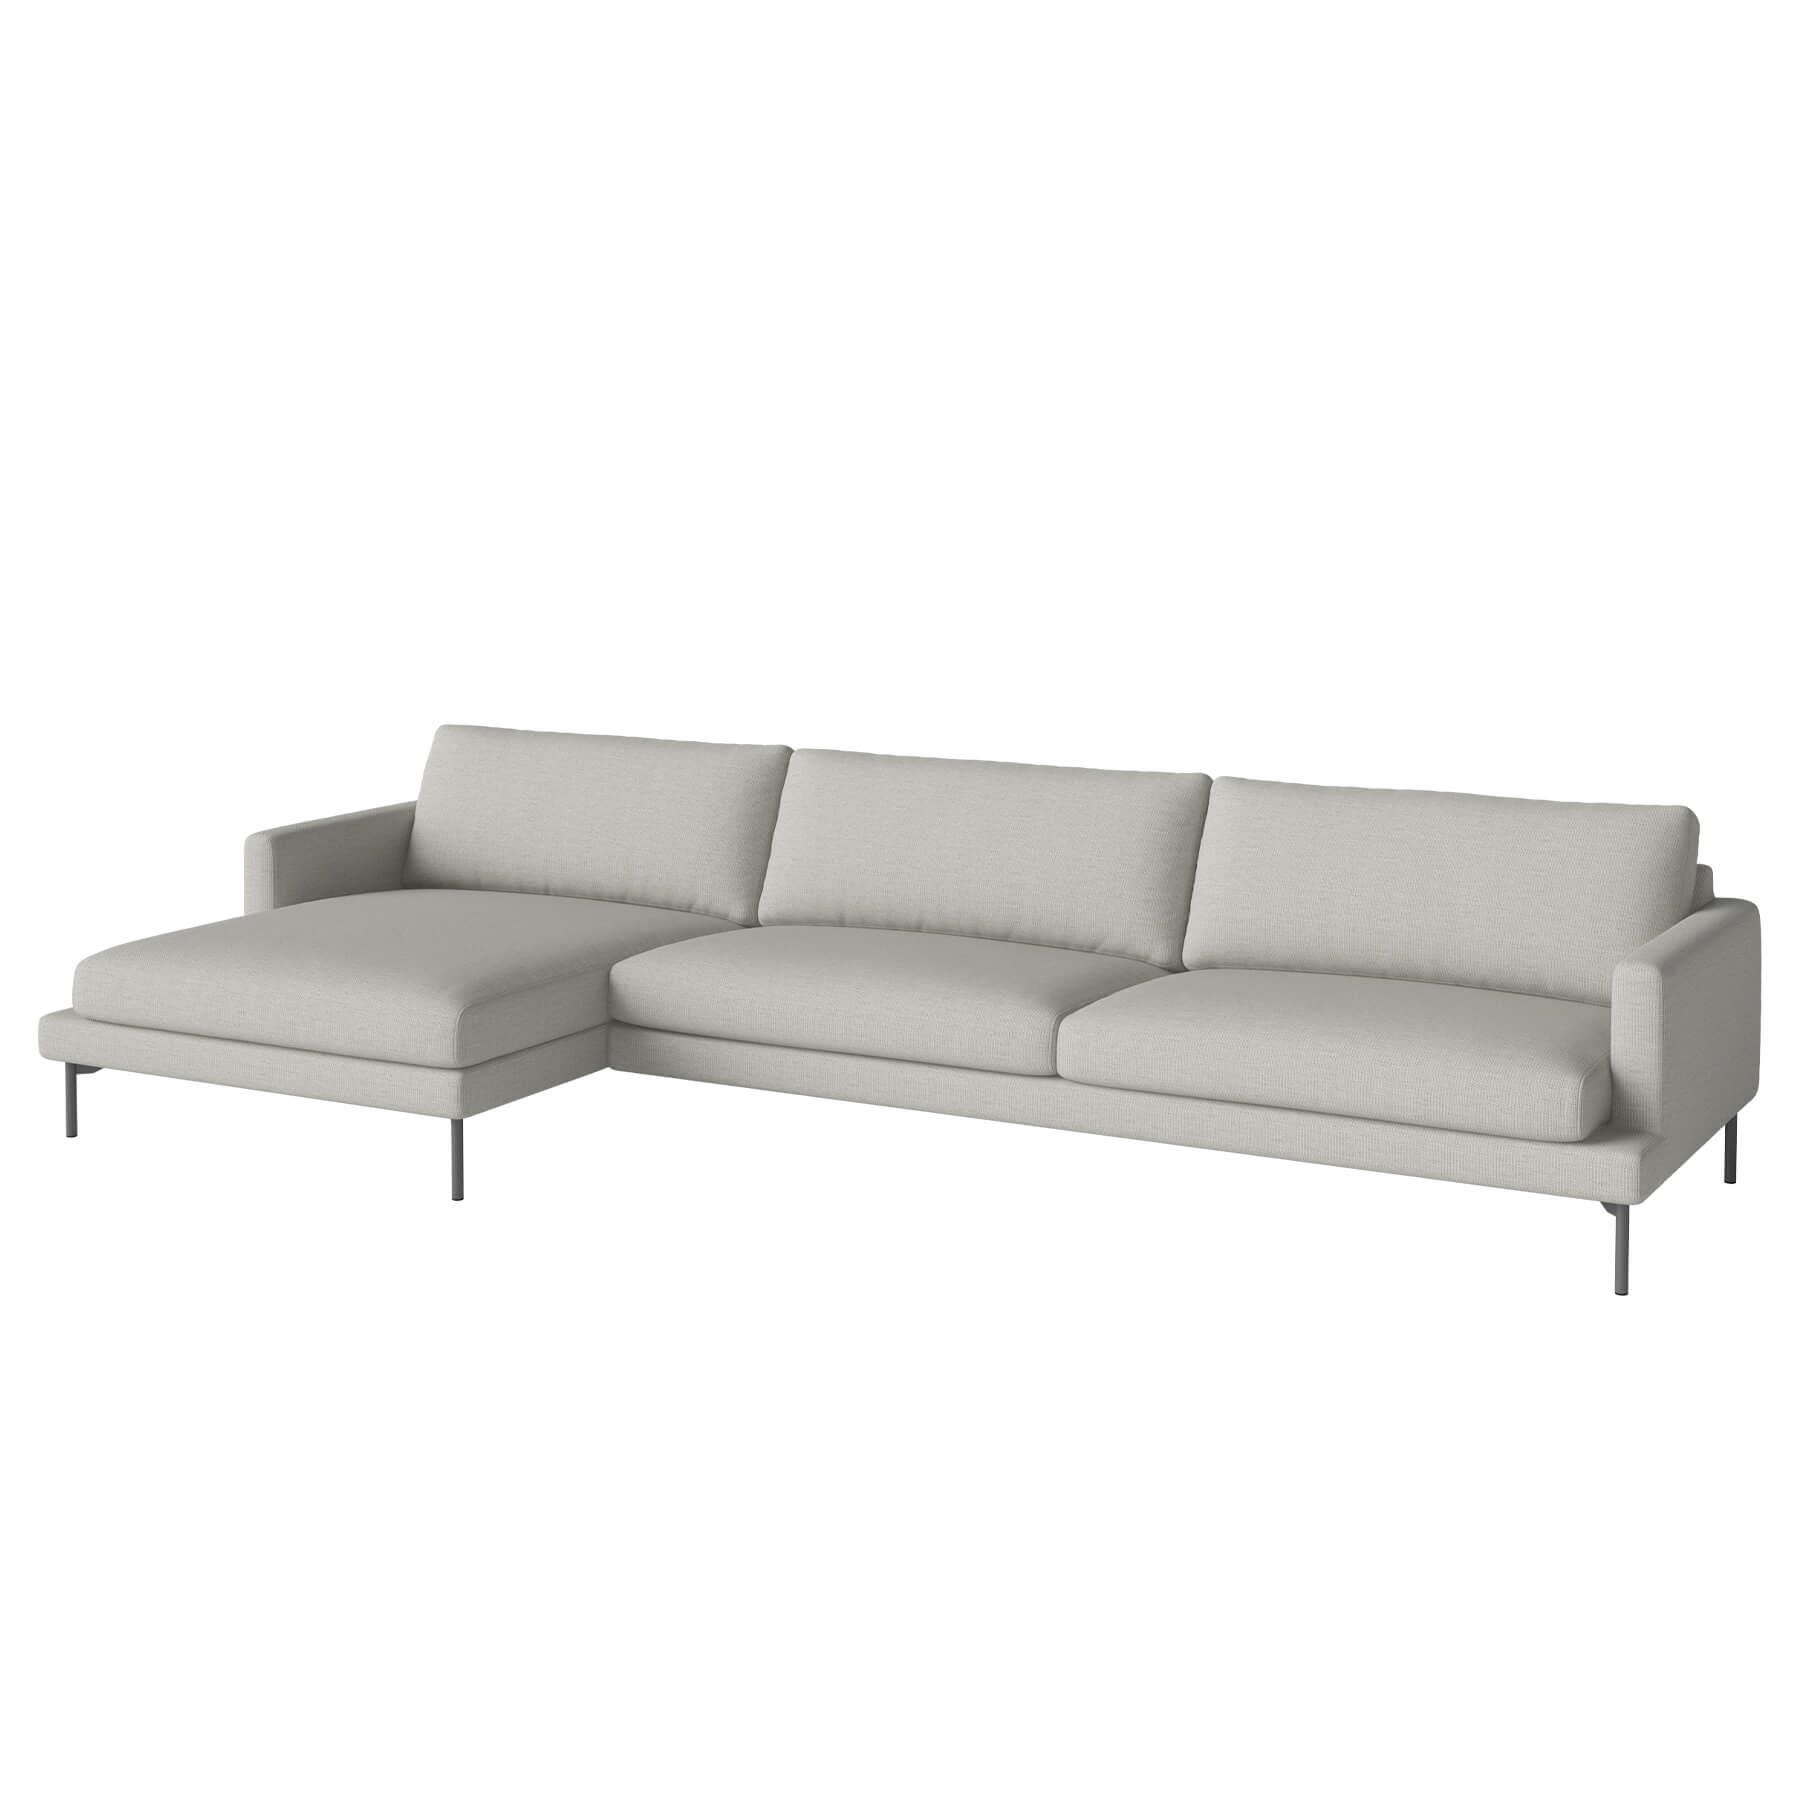 Bolia Veneda Sofa 45 Seater Sofa With Chaise Longue Grey Laquered Steel London Dust Green Left Designer Furniture From Holloways Of Ludlow